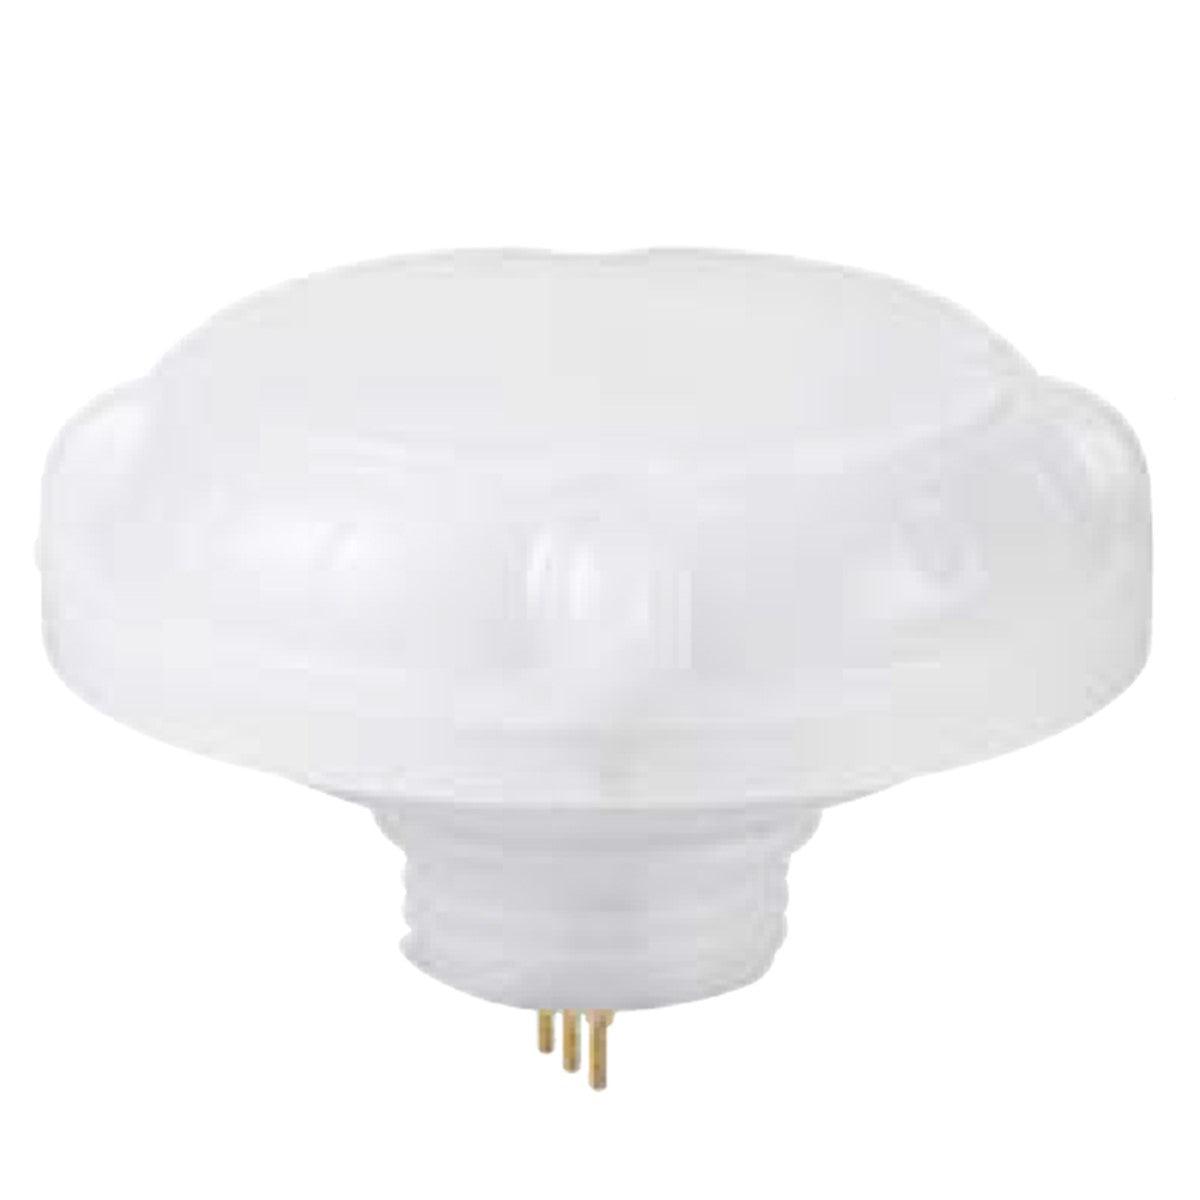 Sylvania High Bay PIR DC Motion/Daylight Sensor, Remote Required To Change Default Settings